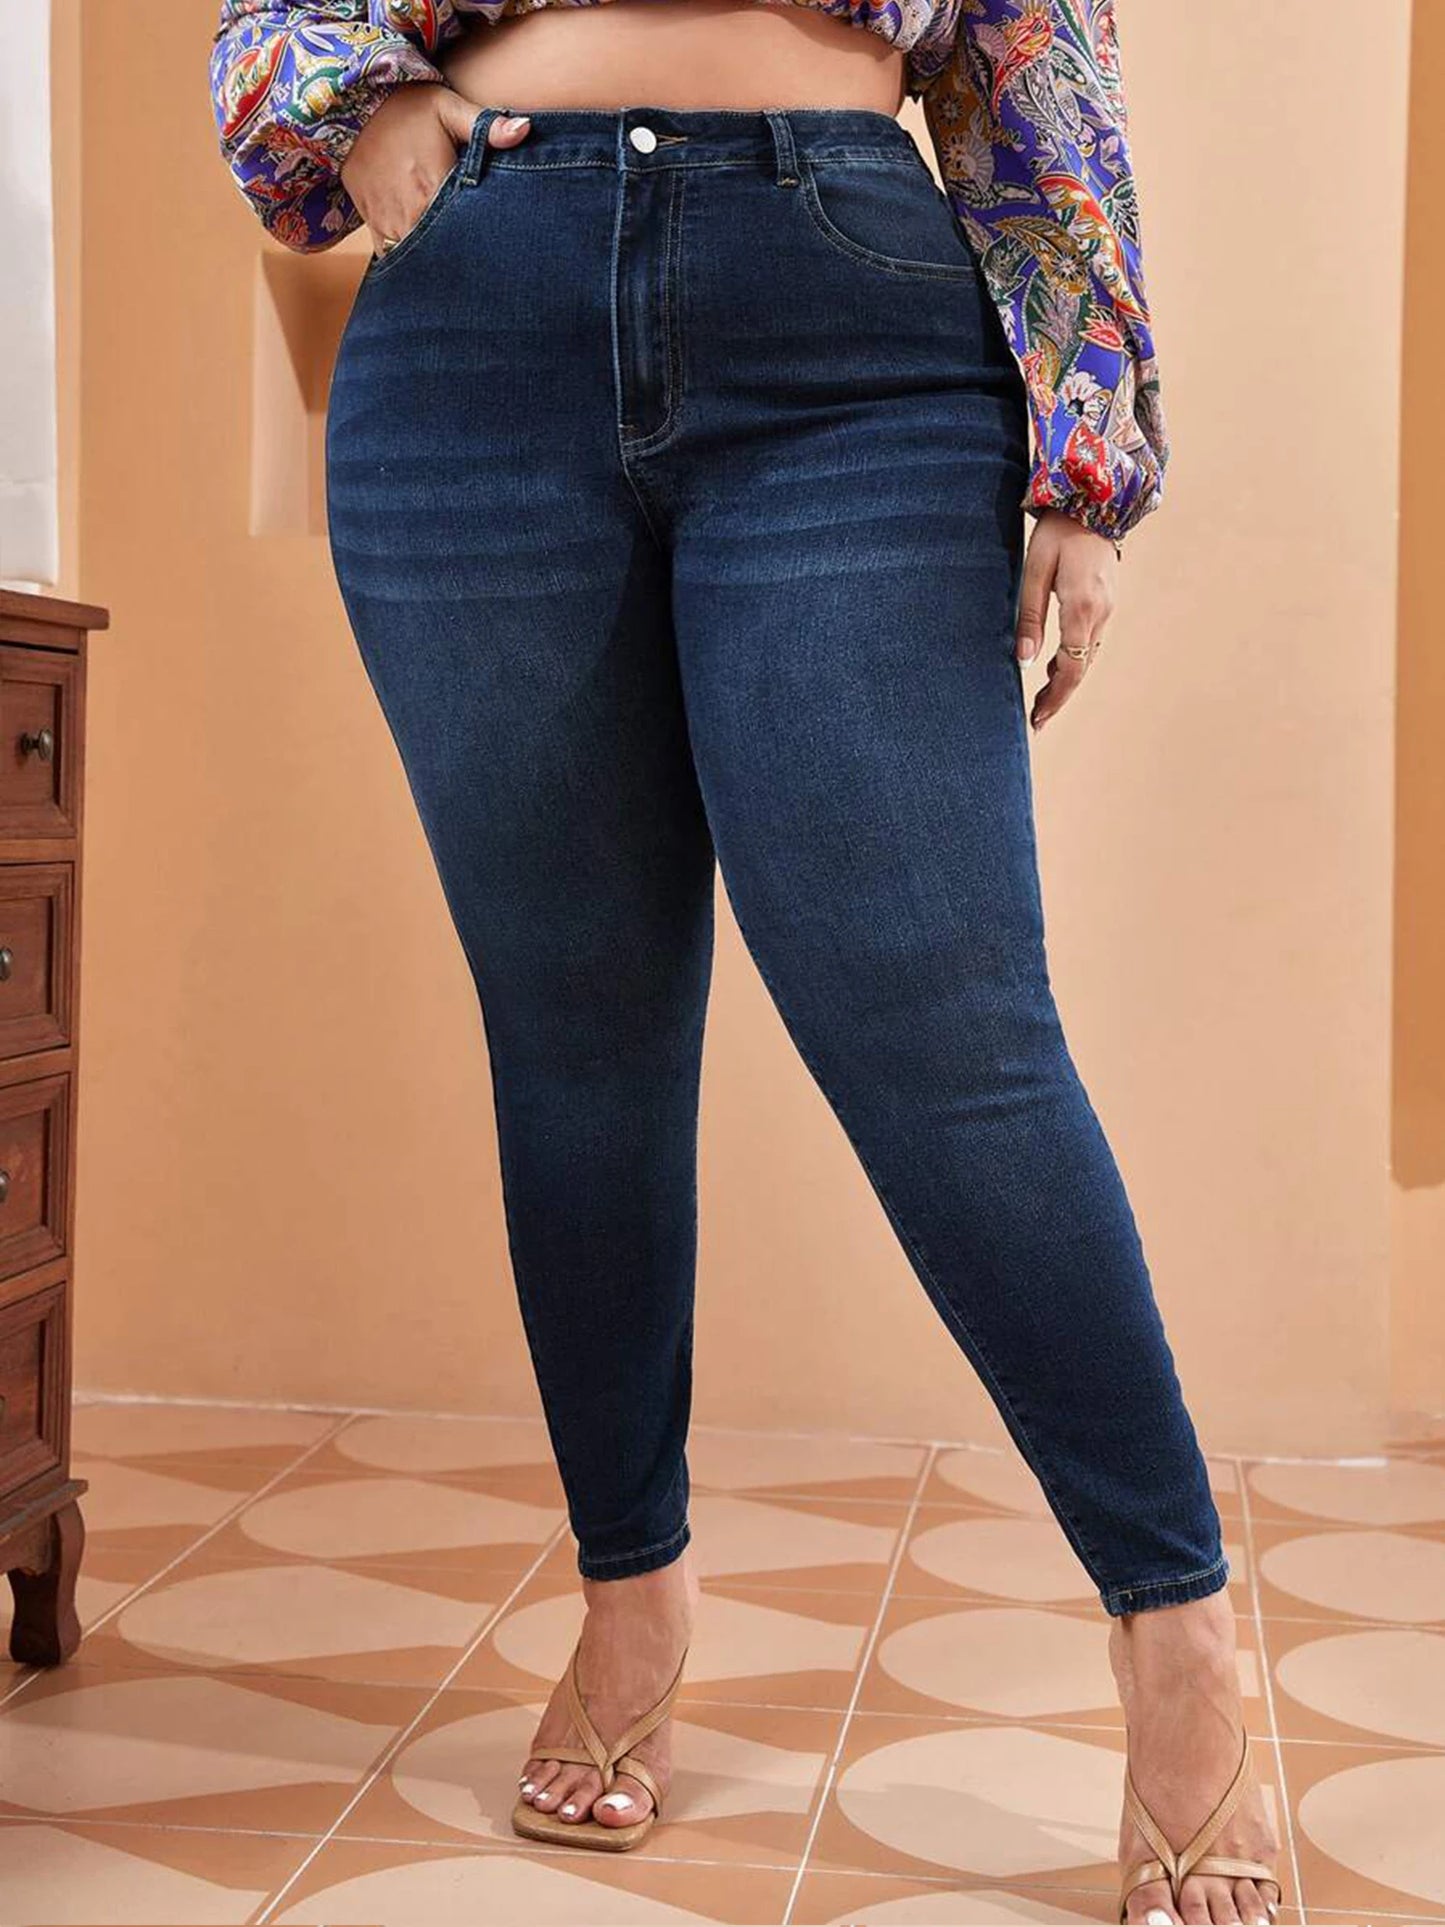 Skinny Jeans High Waist Stretch Denim Trousers Pencil Pants Casual Comfort Trousers